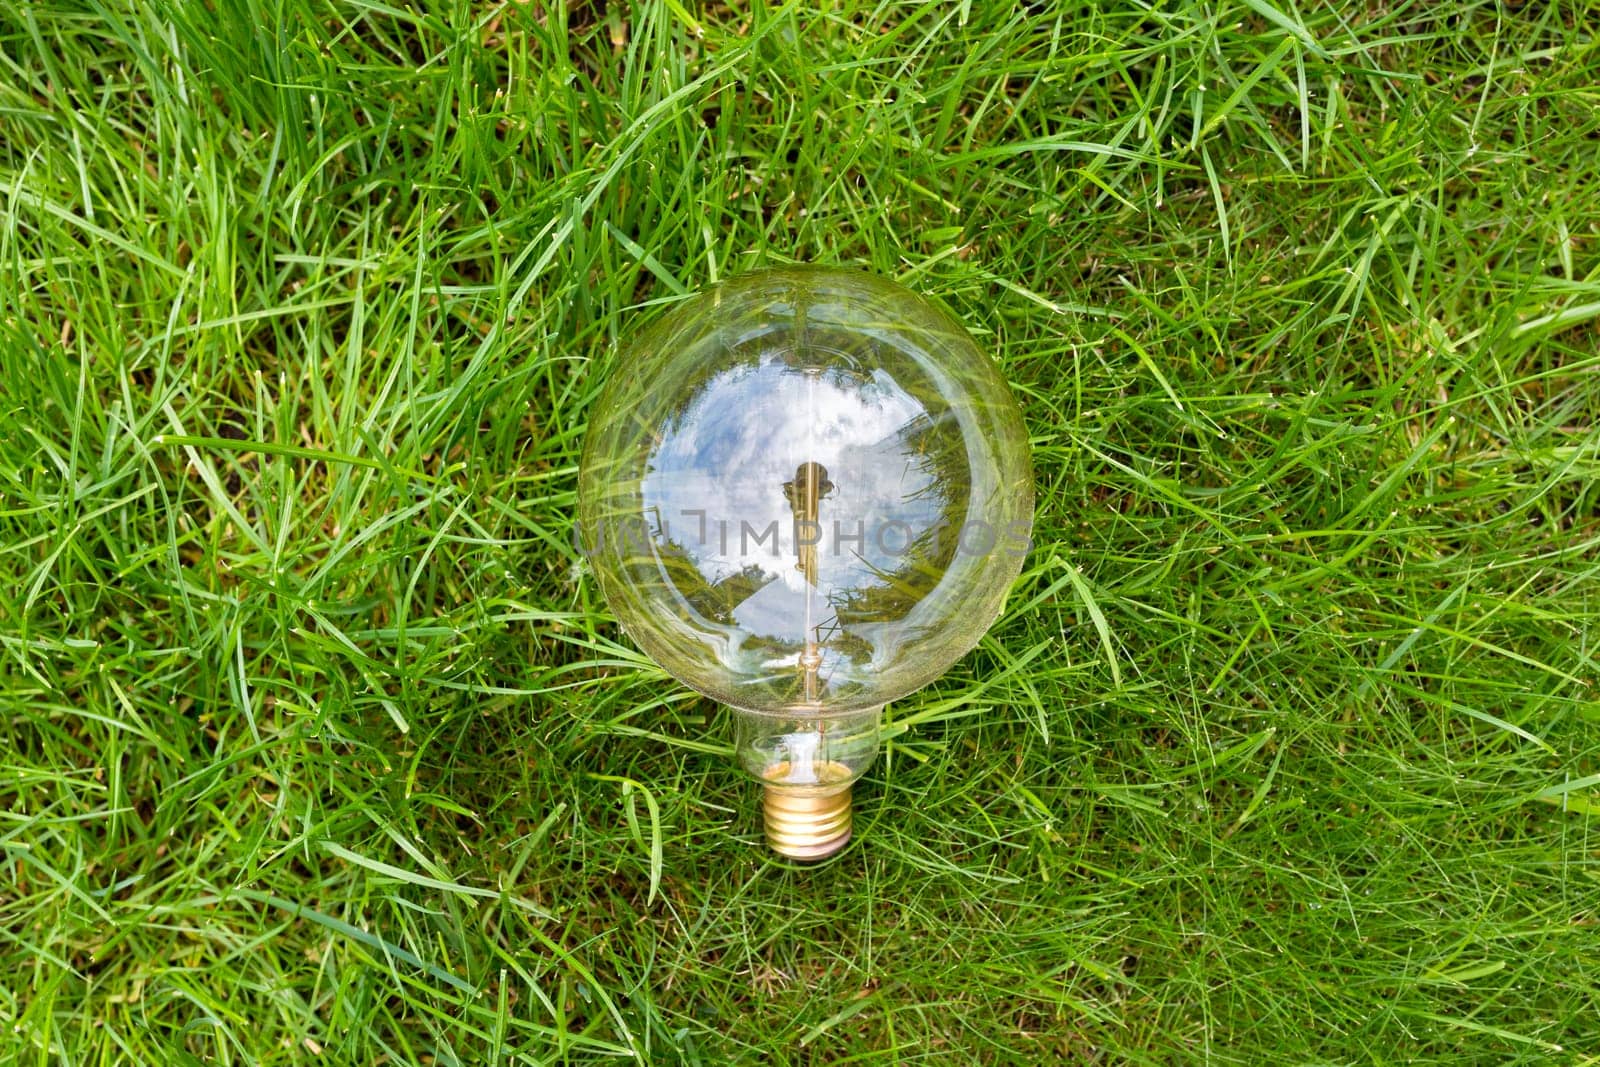 Incandescent lamp in the grass close-up. View from above.